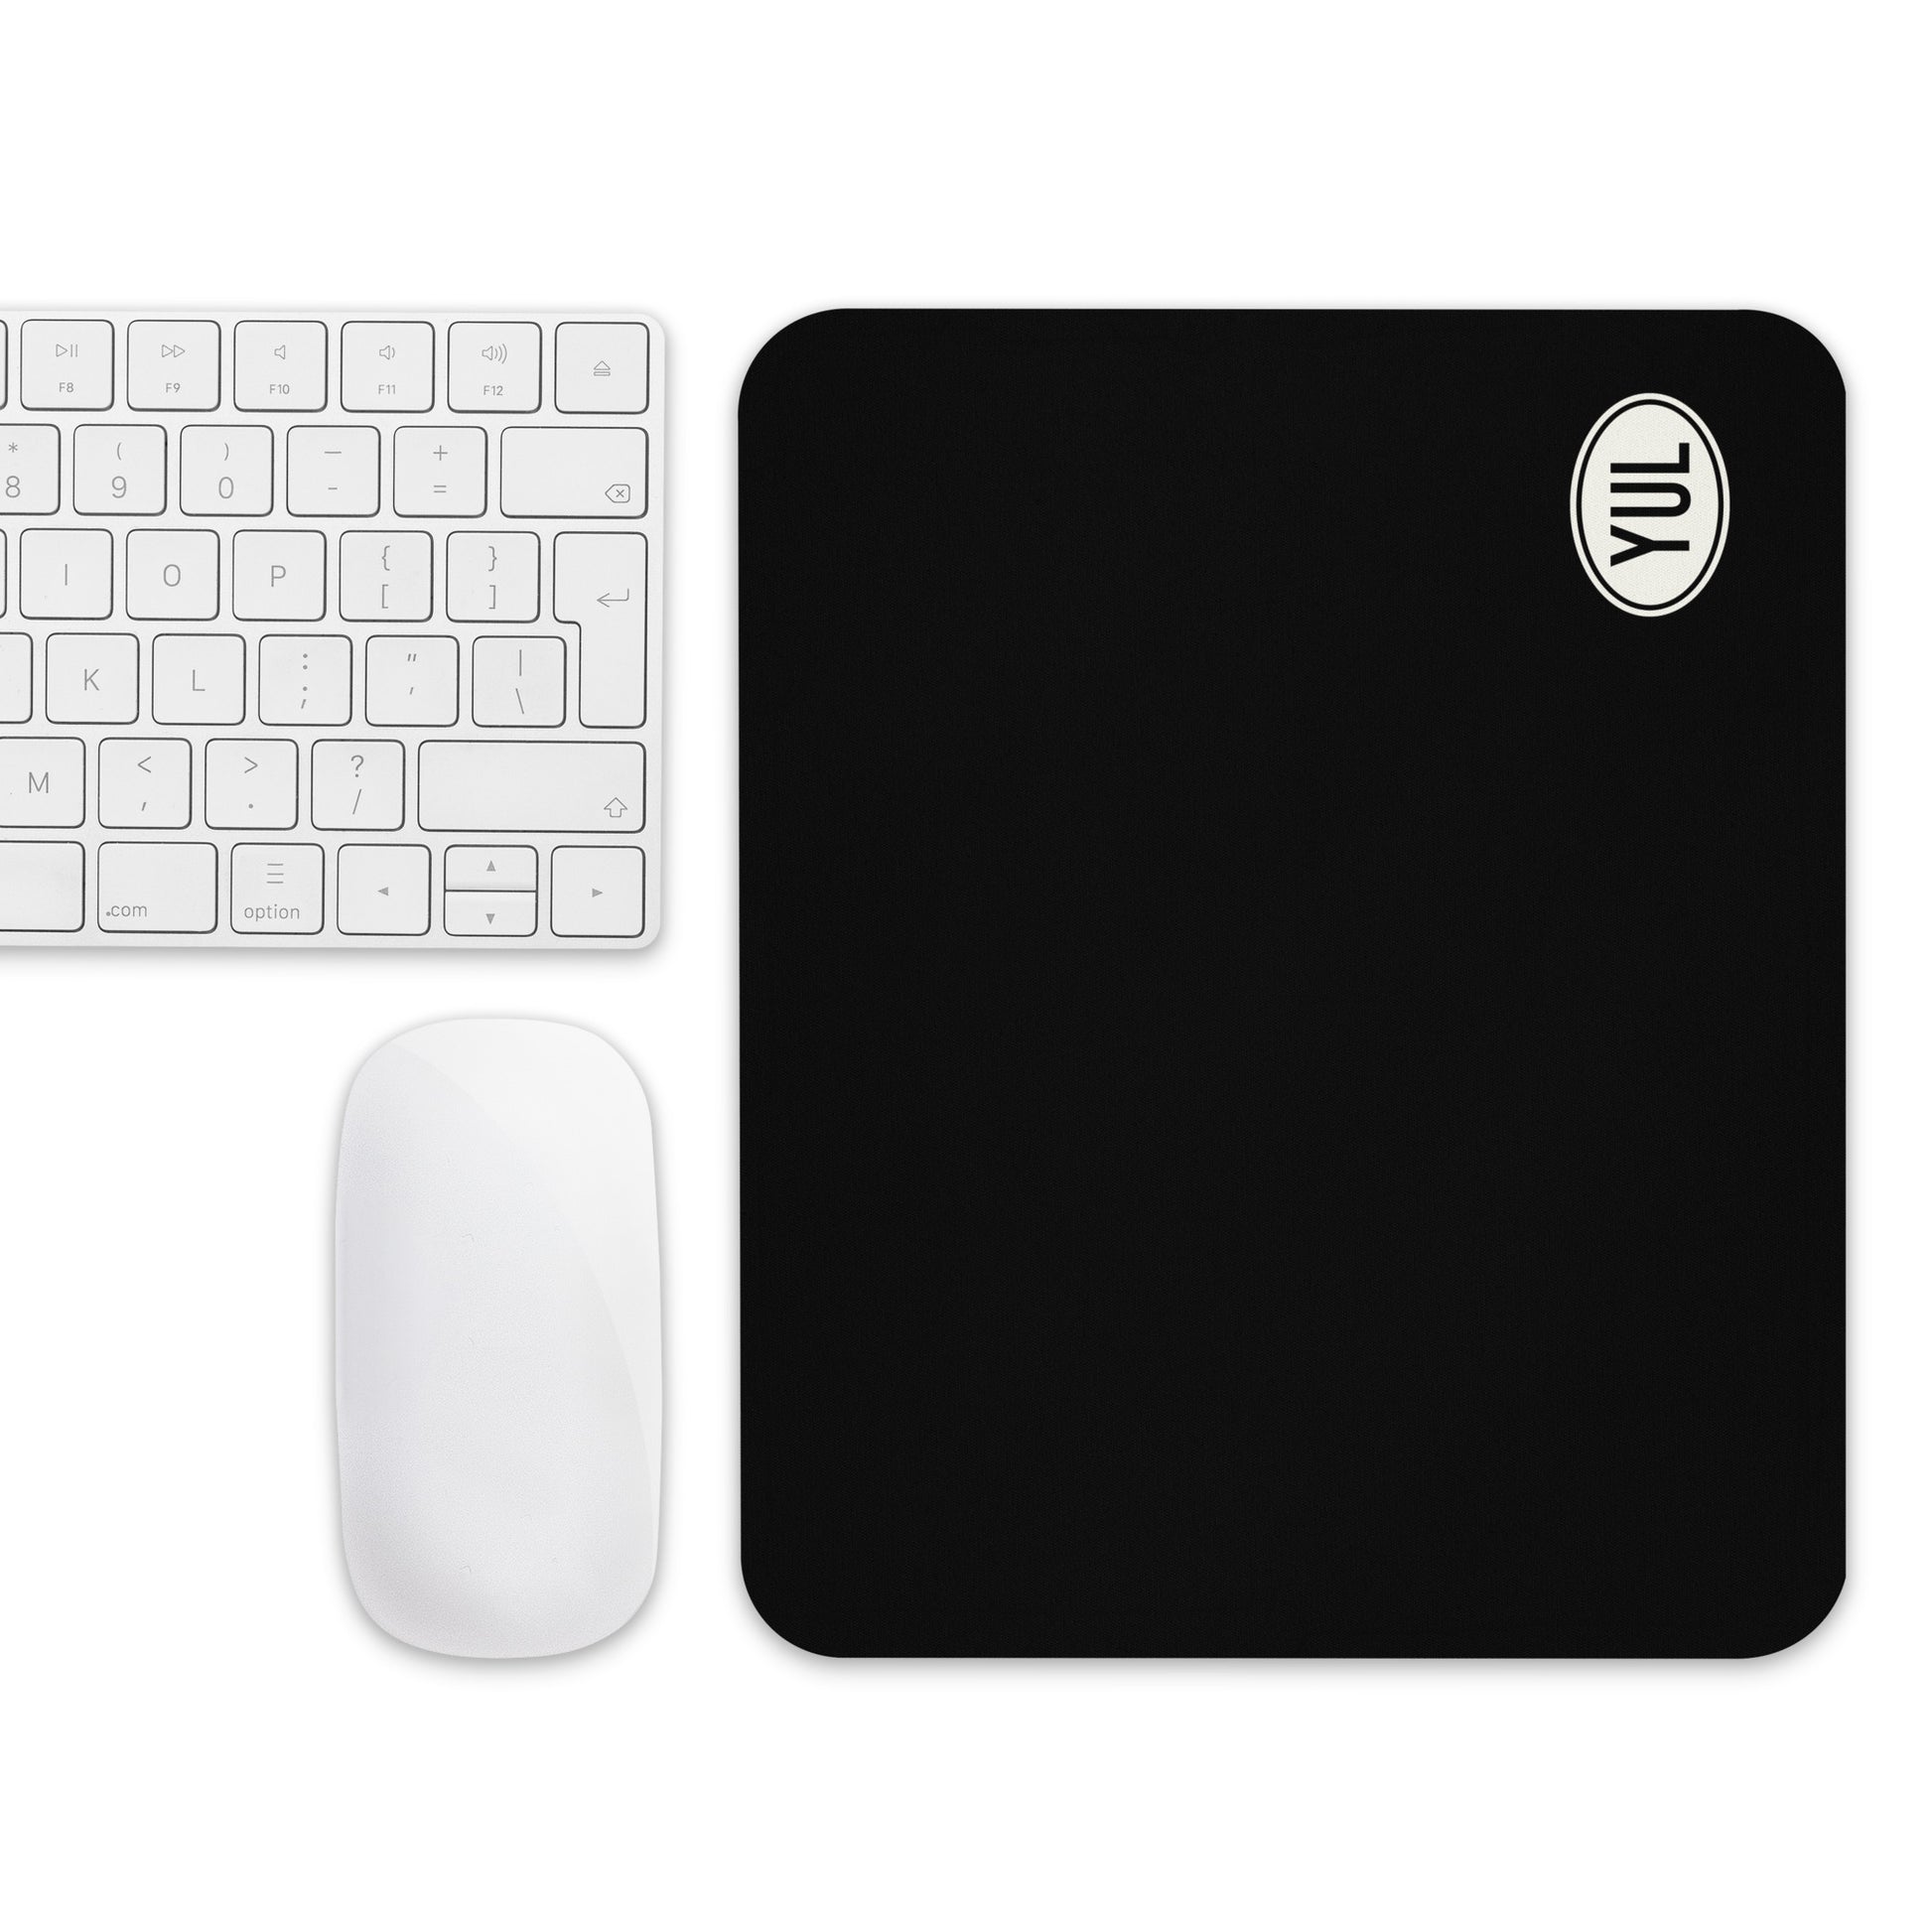 Unique Travel Gift Mouse Pad - White Oval • YUL Montreal • YHM Designs - Image 04